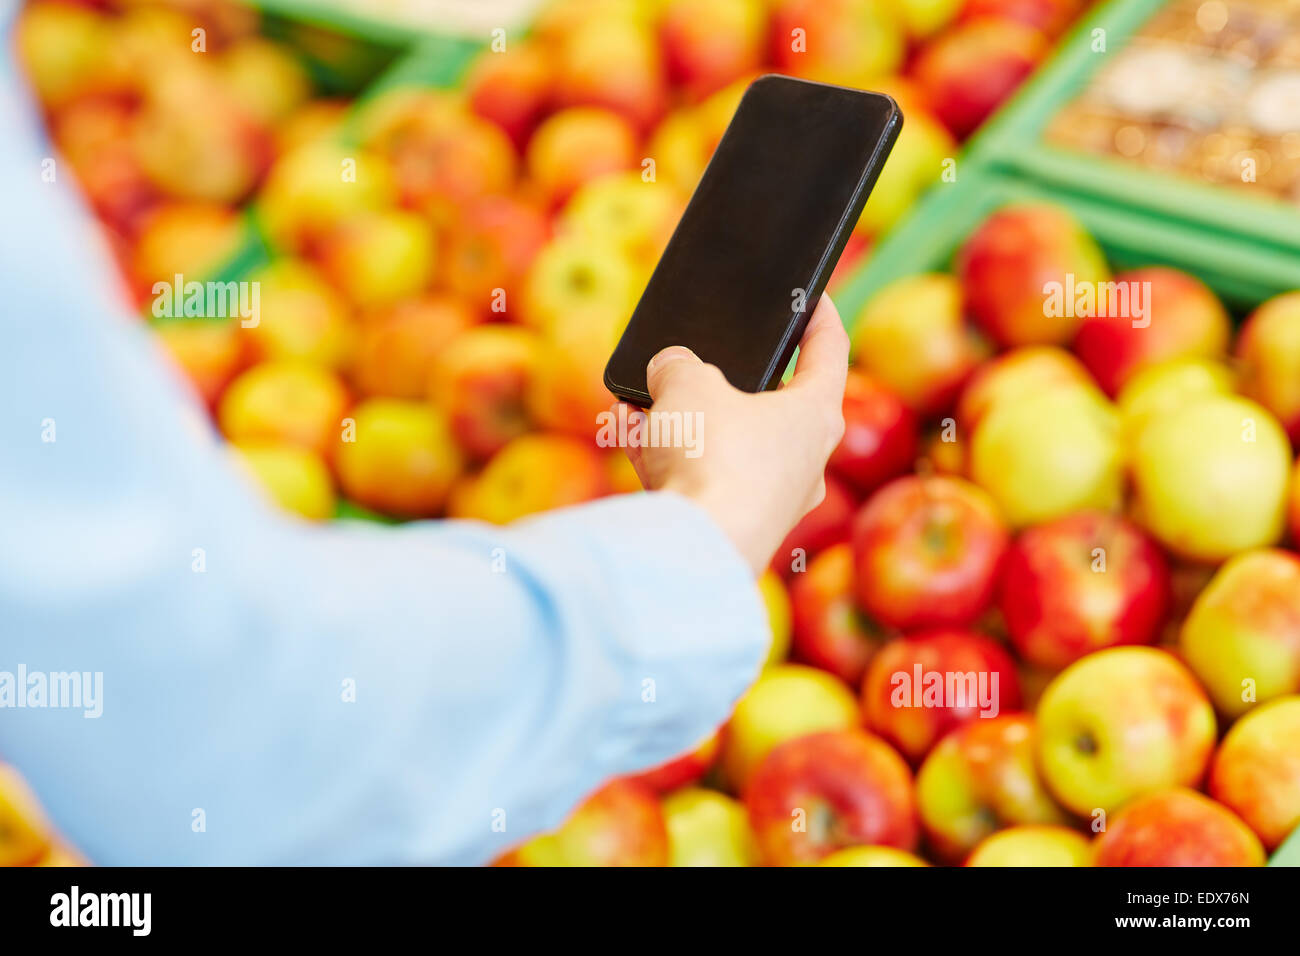 Male hand holding smartphone in front of fruits in a supermarket Stock Photo